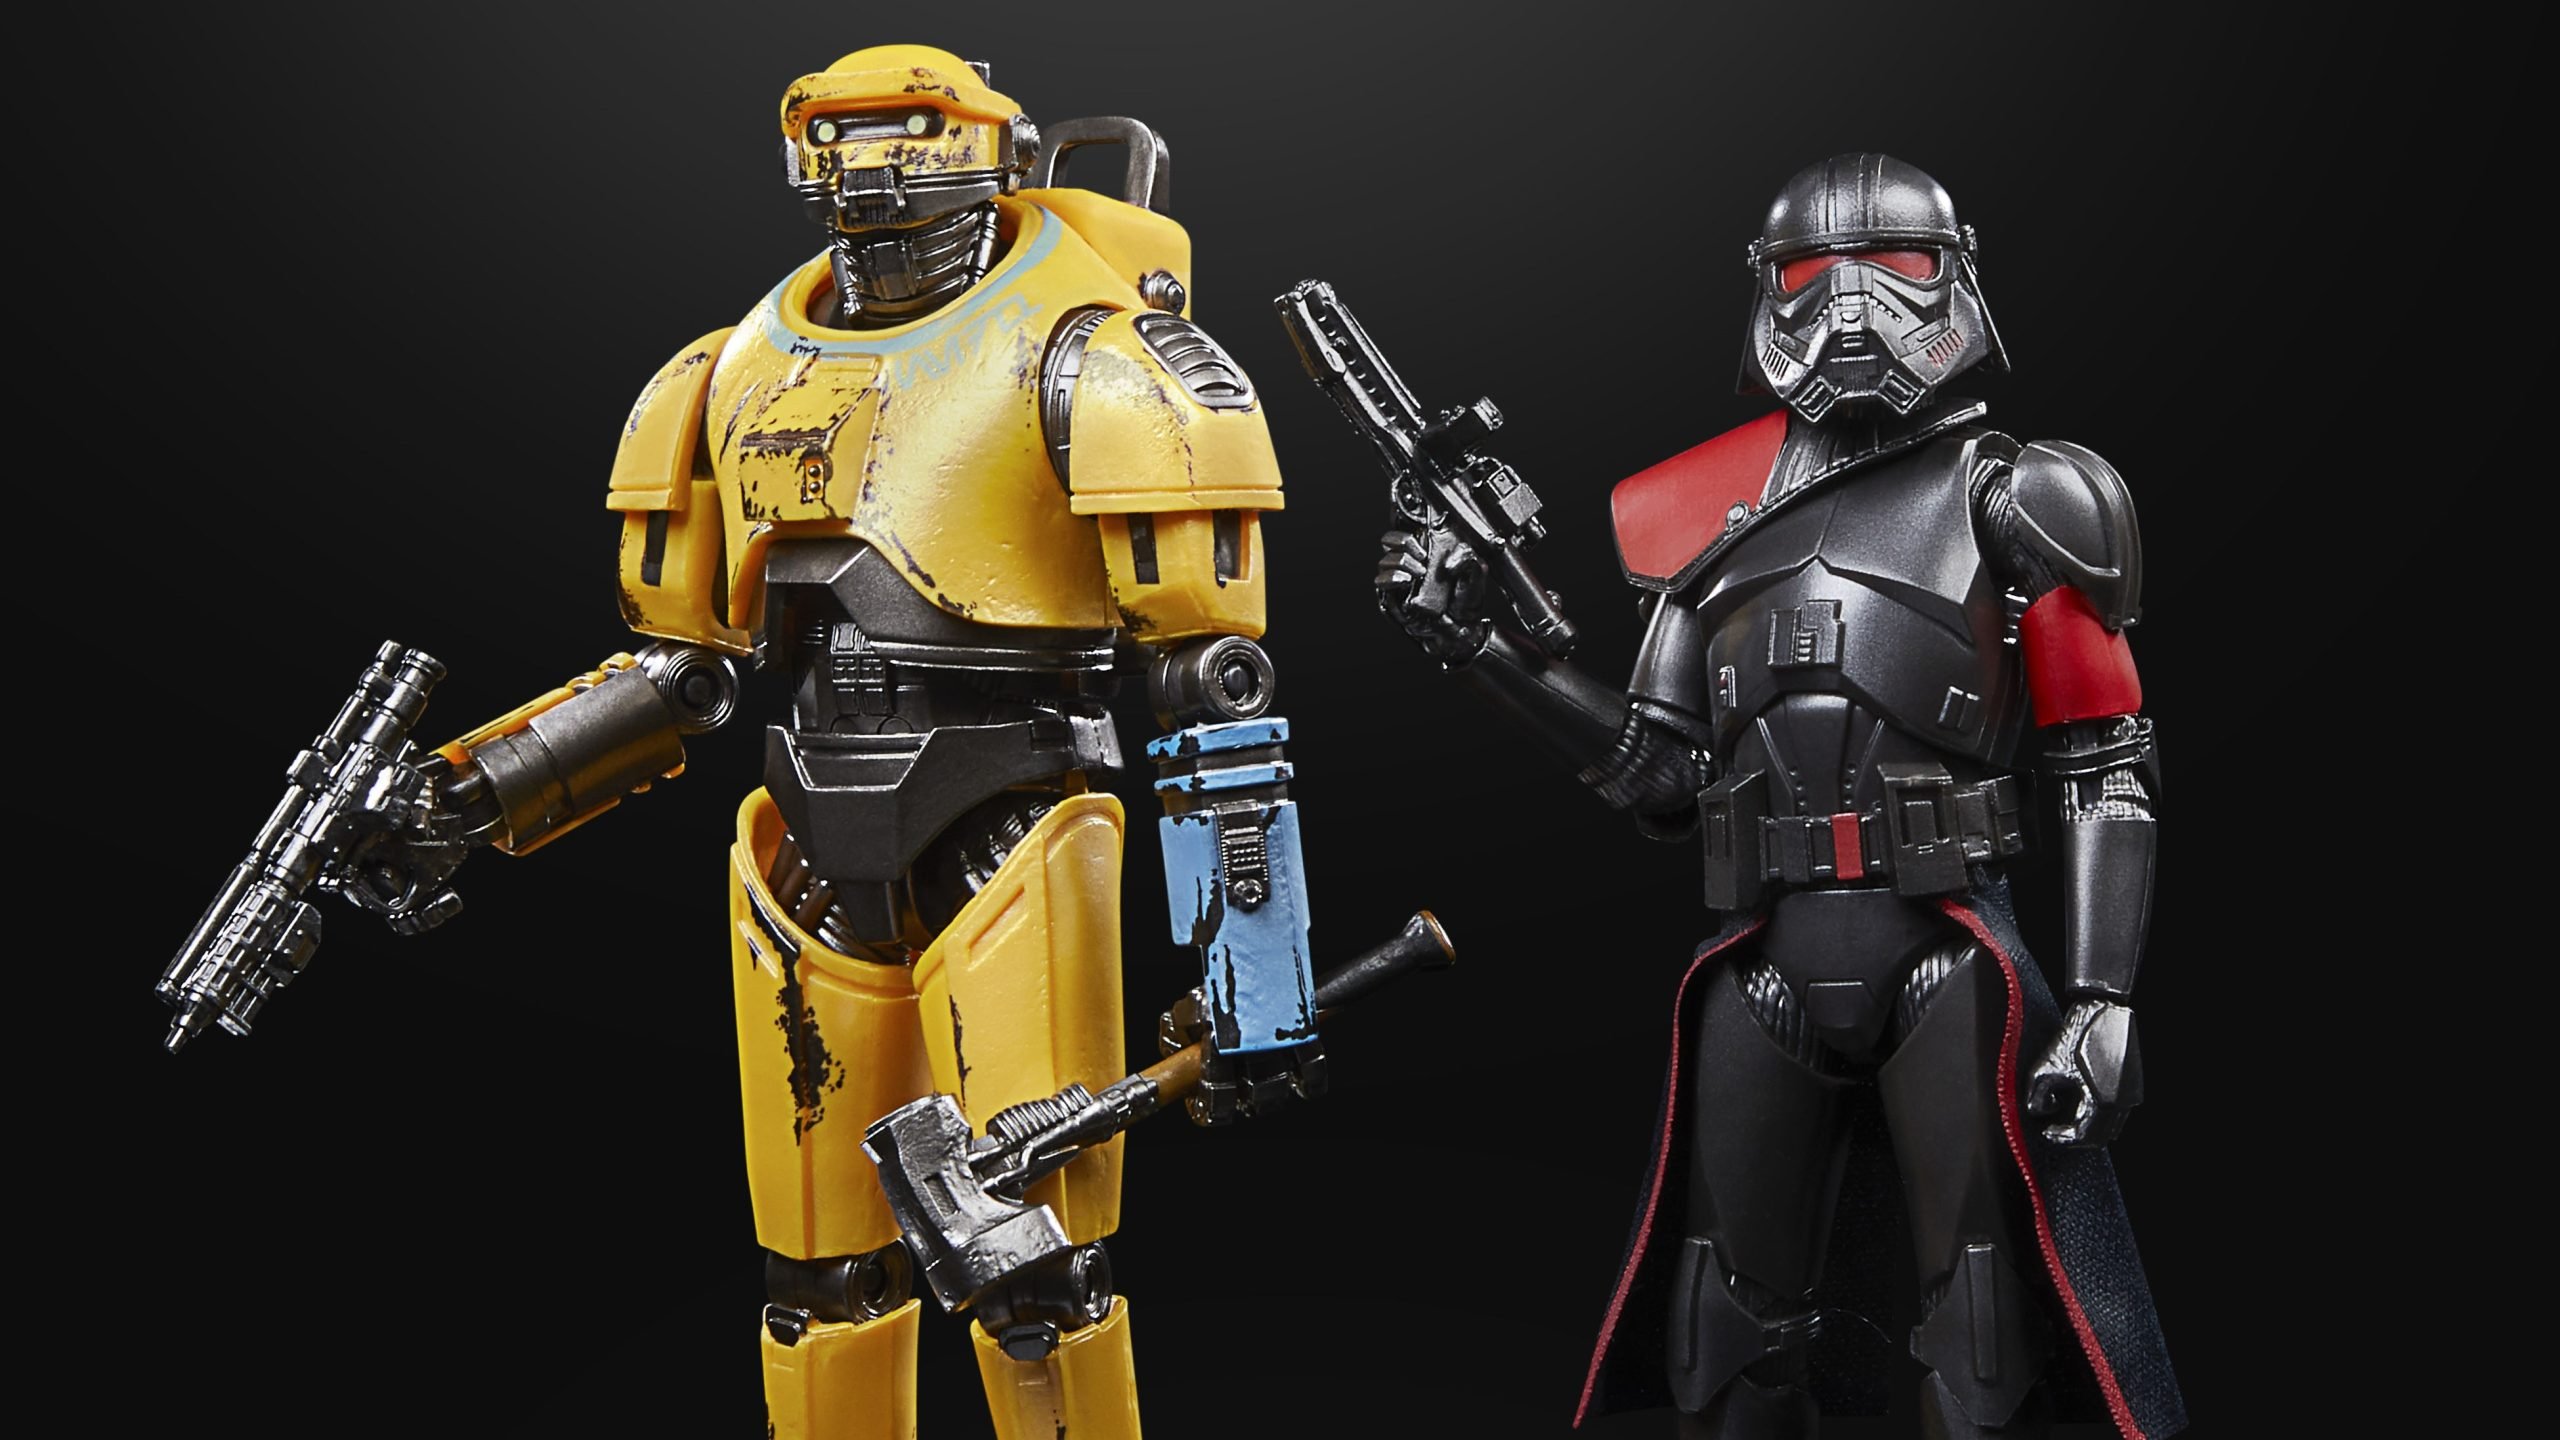 https://www.starwarsnewsnet.com/wp-content/uploads/2023/02/STAR-WARS-THE-BLACK-SERIES-CARBONIZED-COLLECTION-NED-B-AND-PURGE-TROOPER-1-scaled.jpg